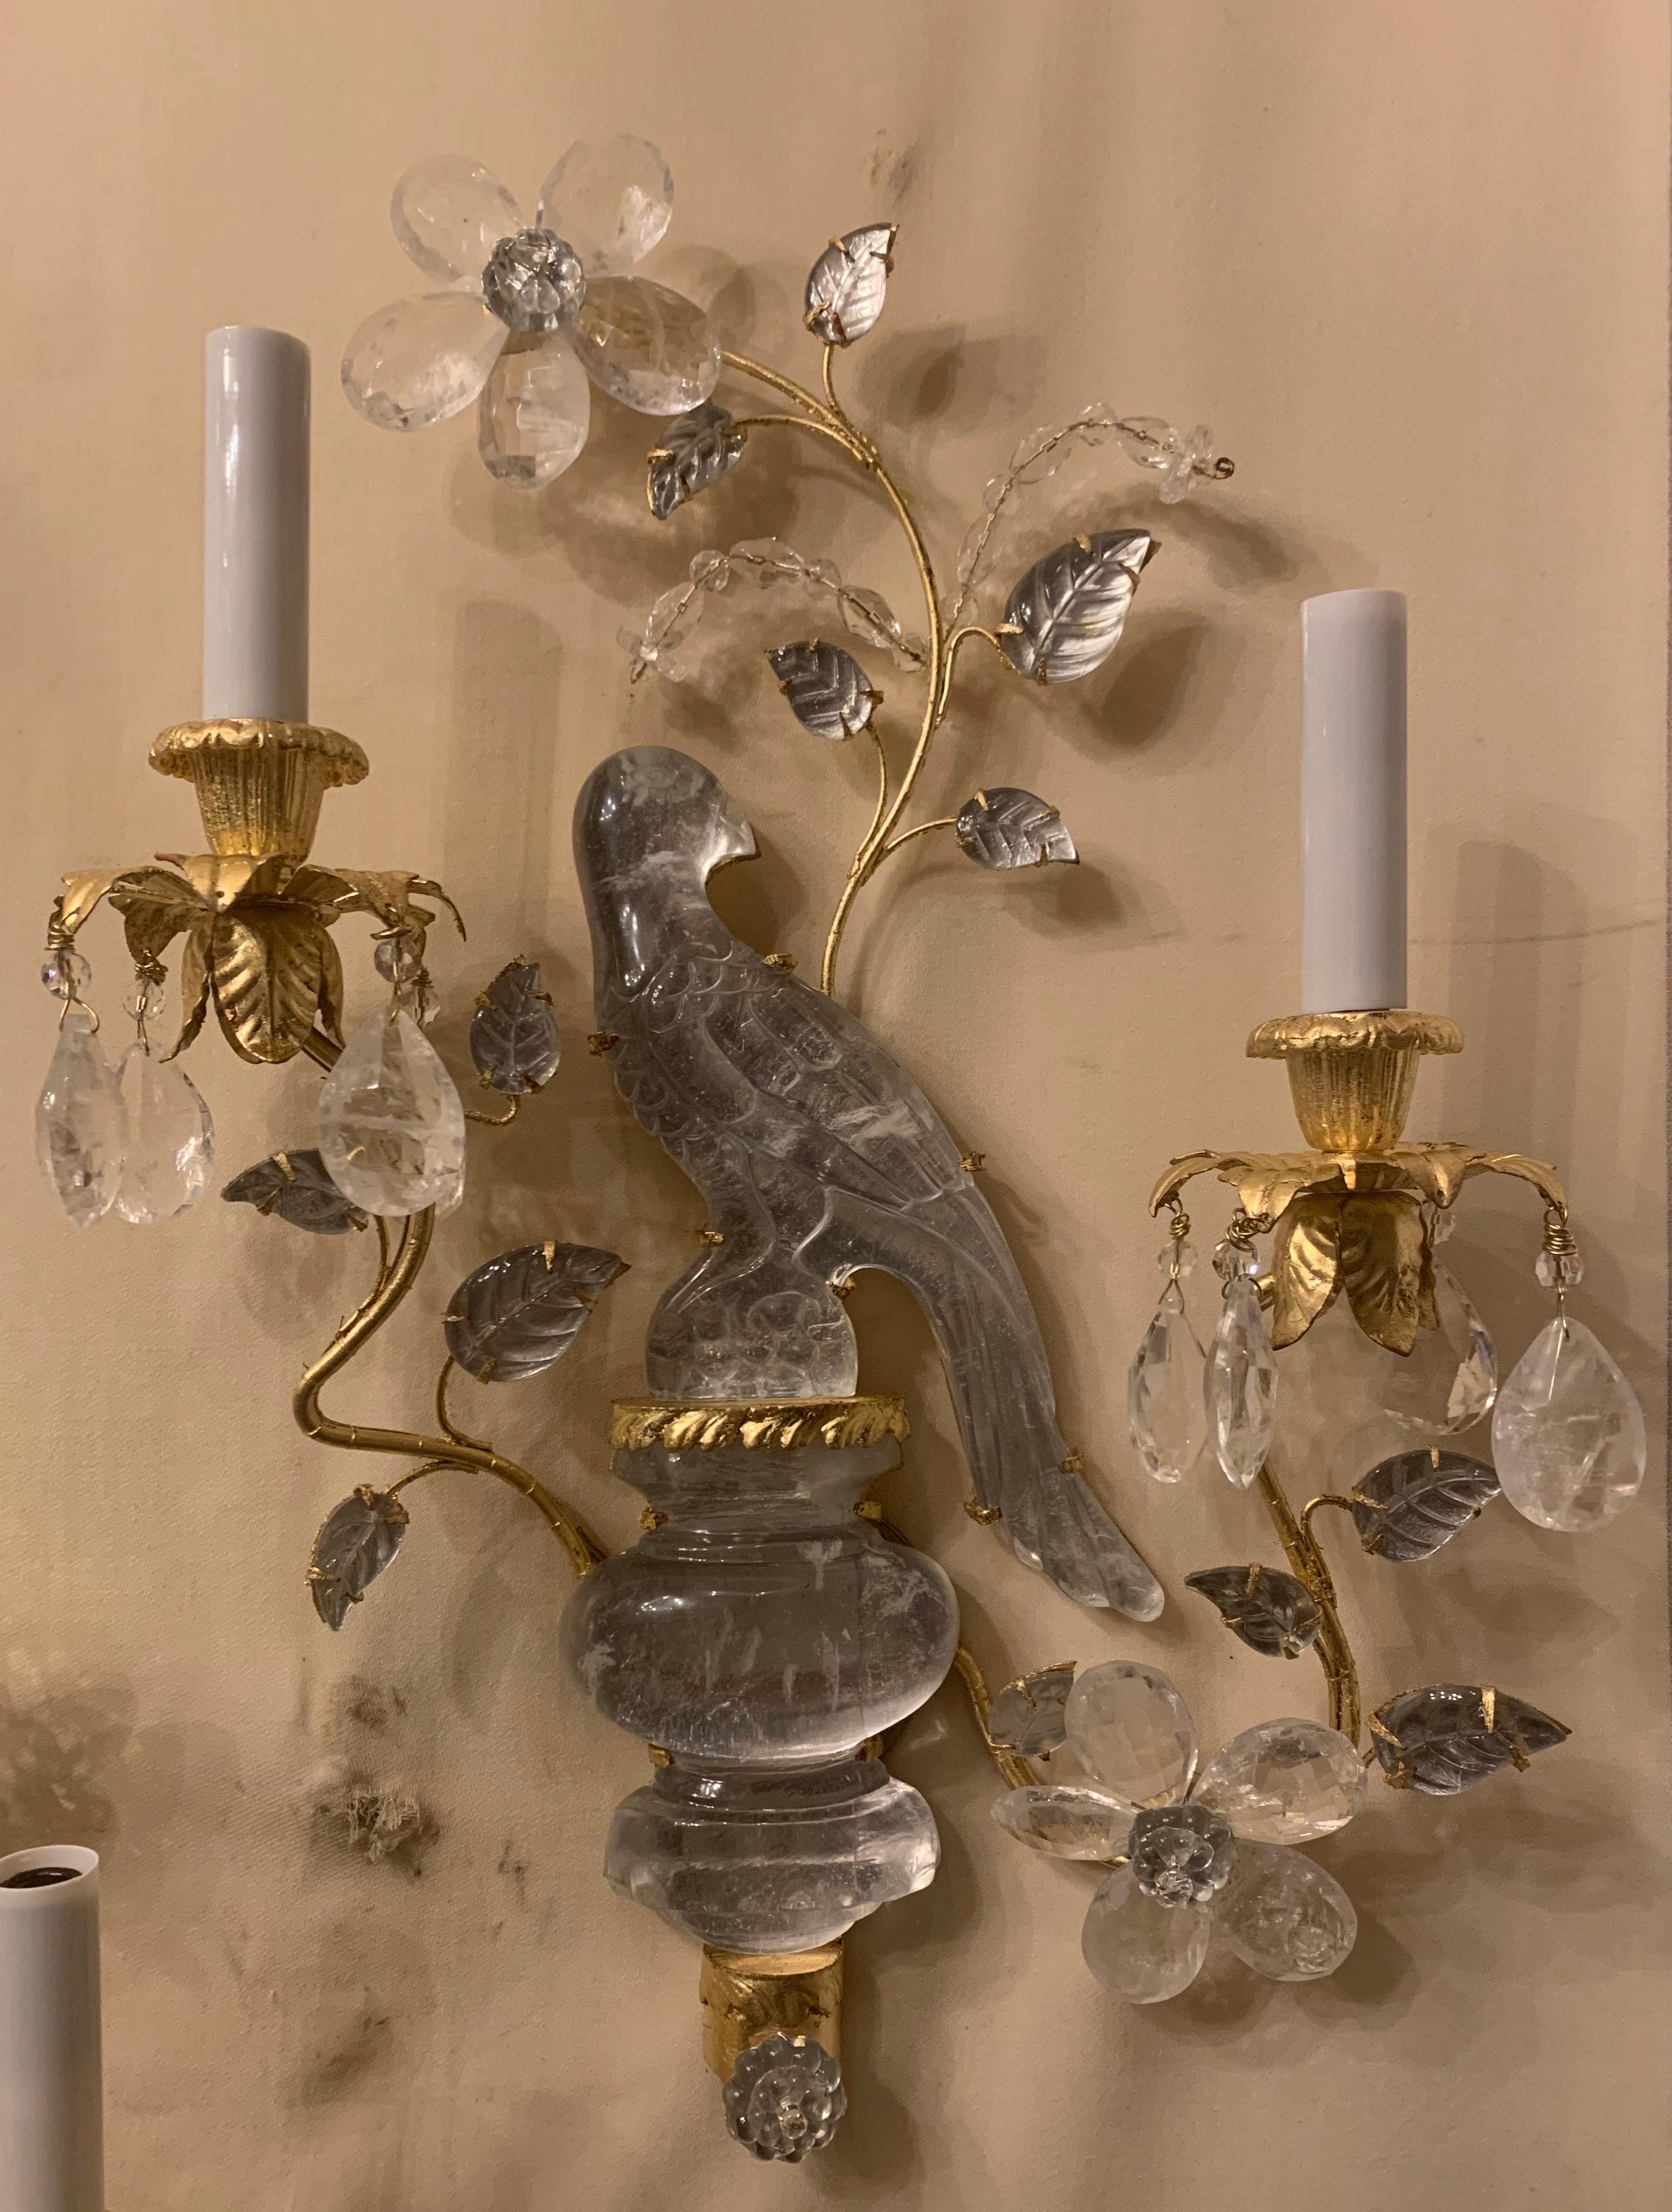 A wonderful pair of Baguès style two-arm rock crystal bird / parrot urn form gold gilt sconces adorned with leaves and flowers, newly rewired with candelabra sockets each pair has a right and left facing bird.

Second pair also available.